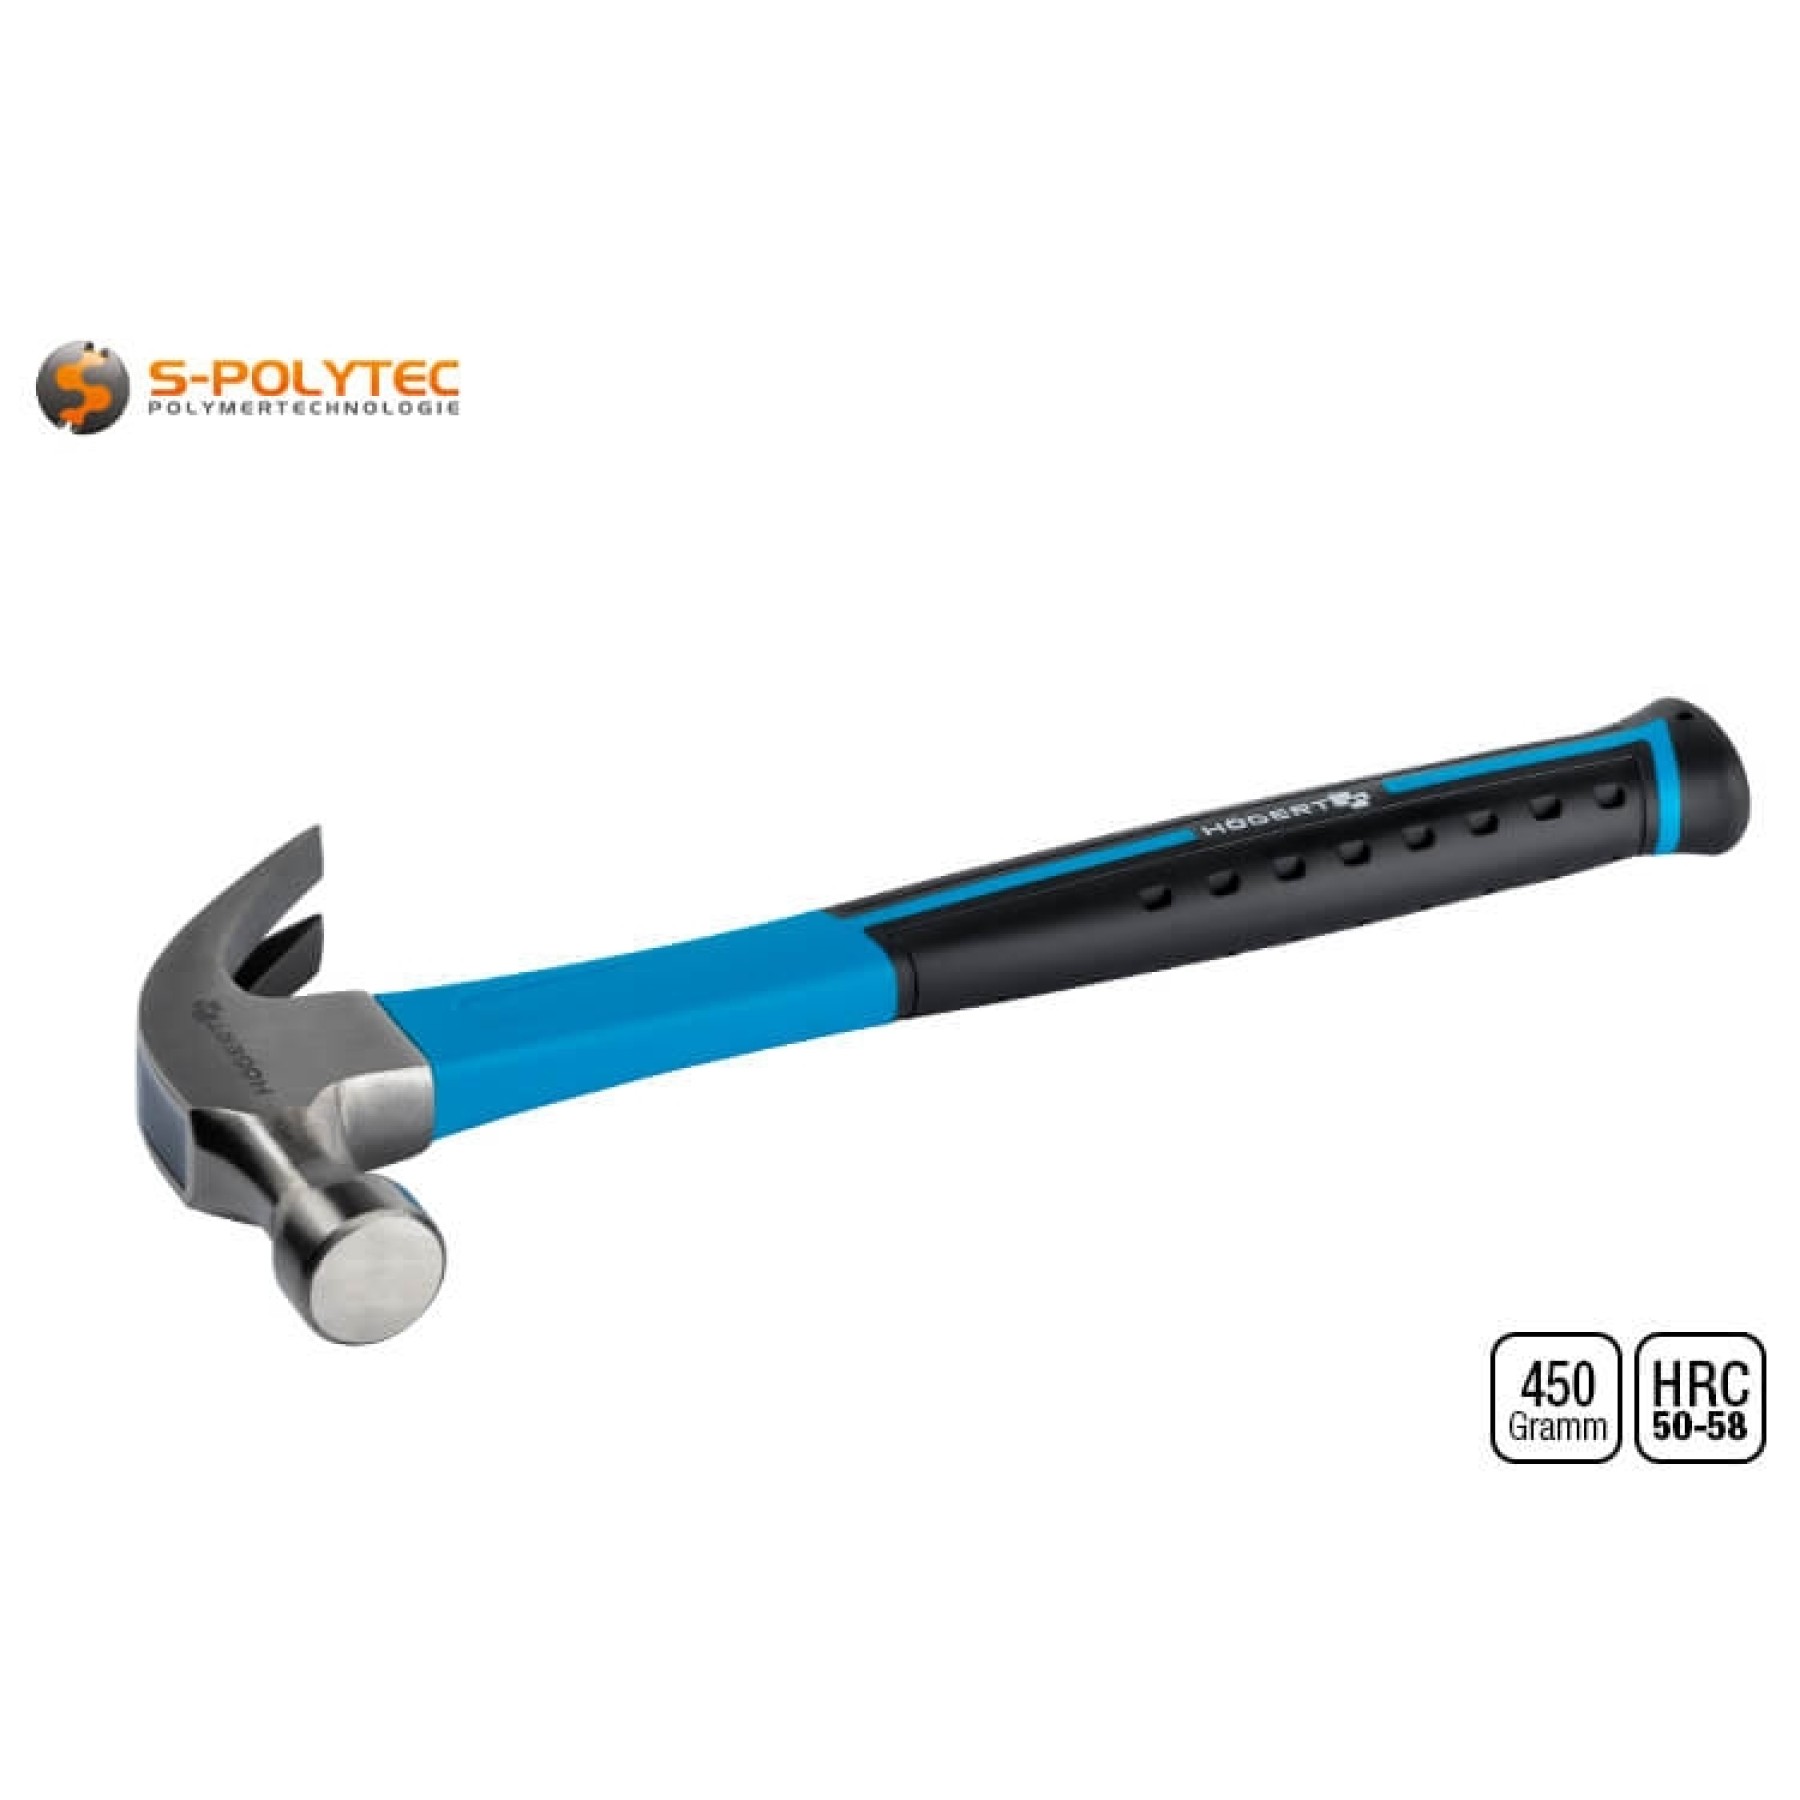 The claw hammer has a hammer head made of forged CS45 steel with a head weight of 450g